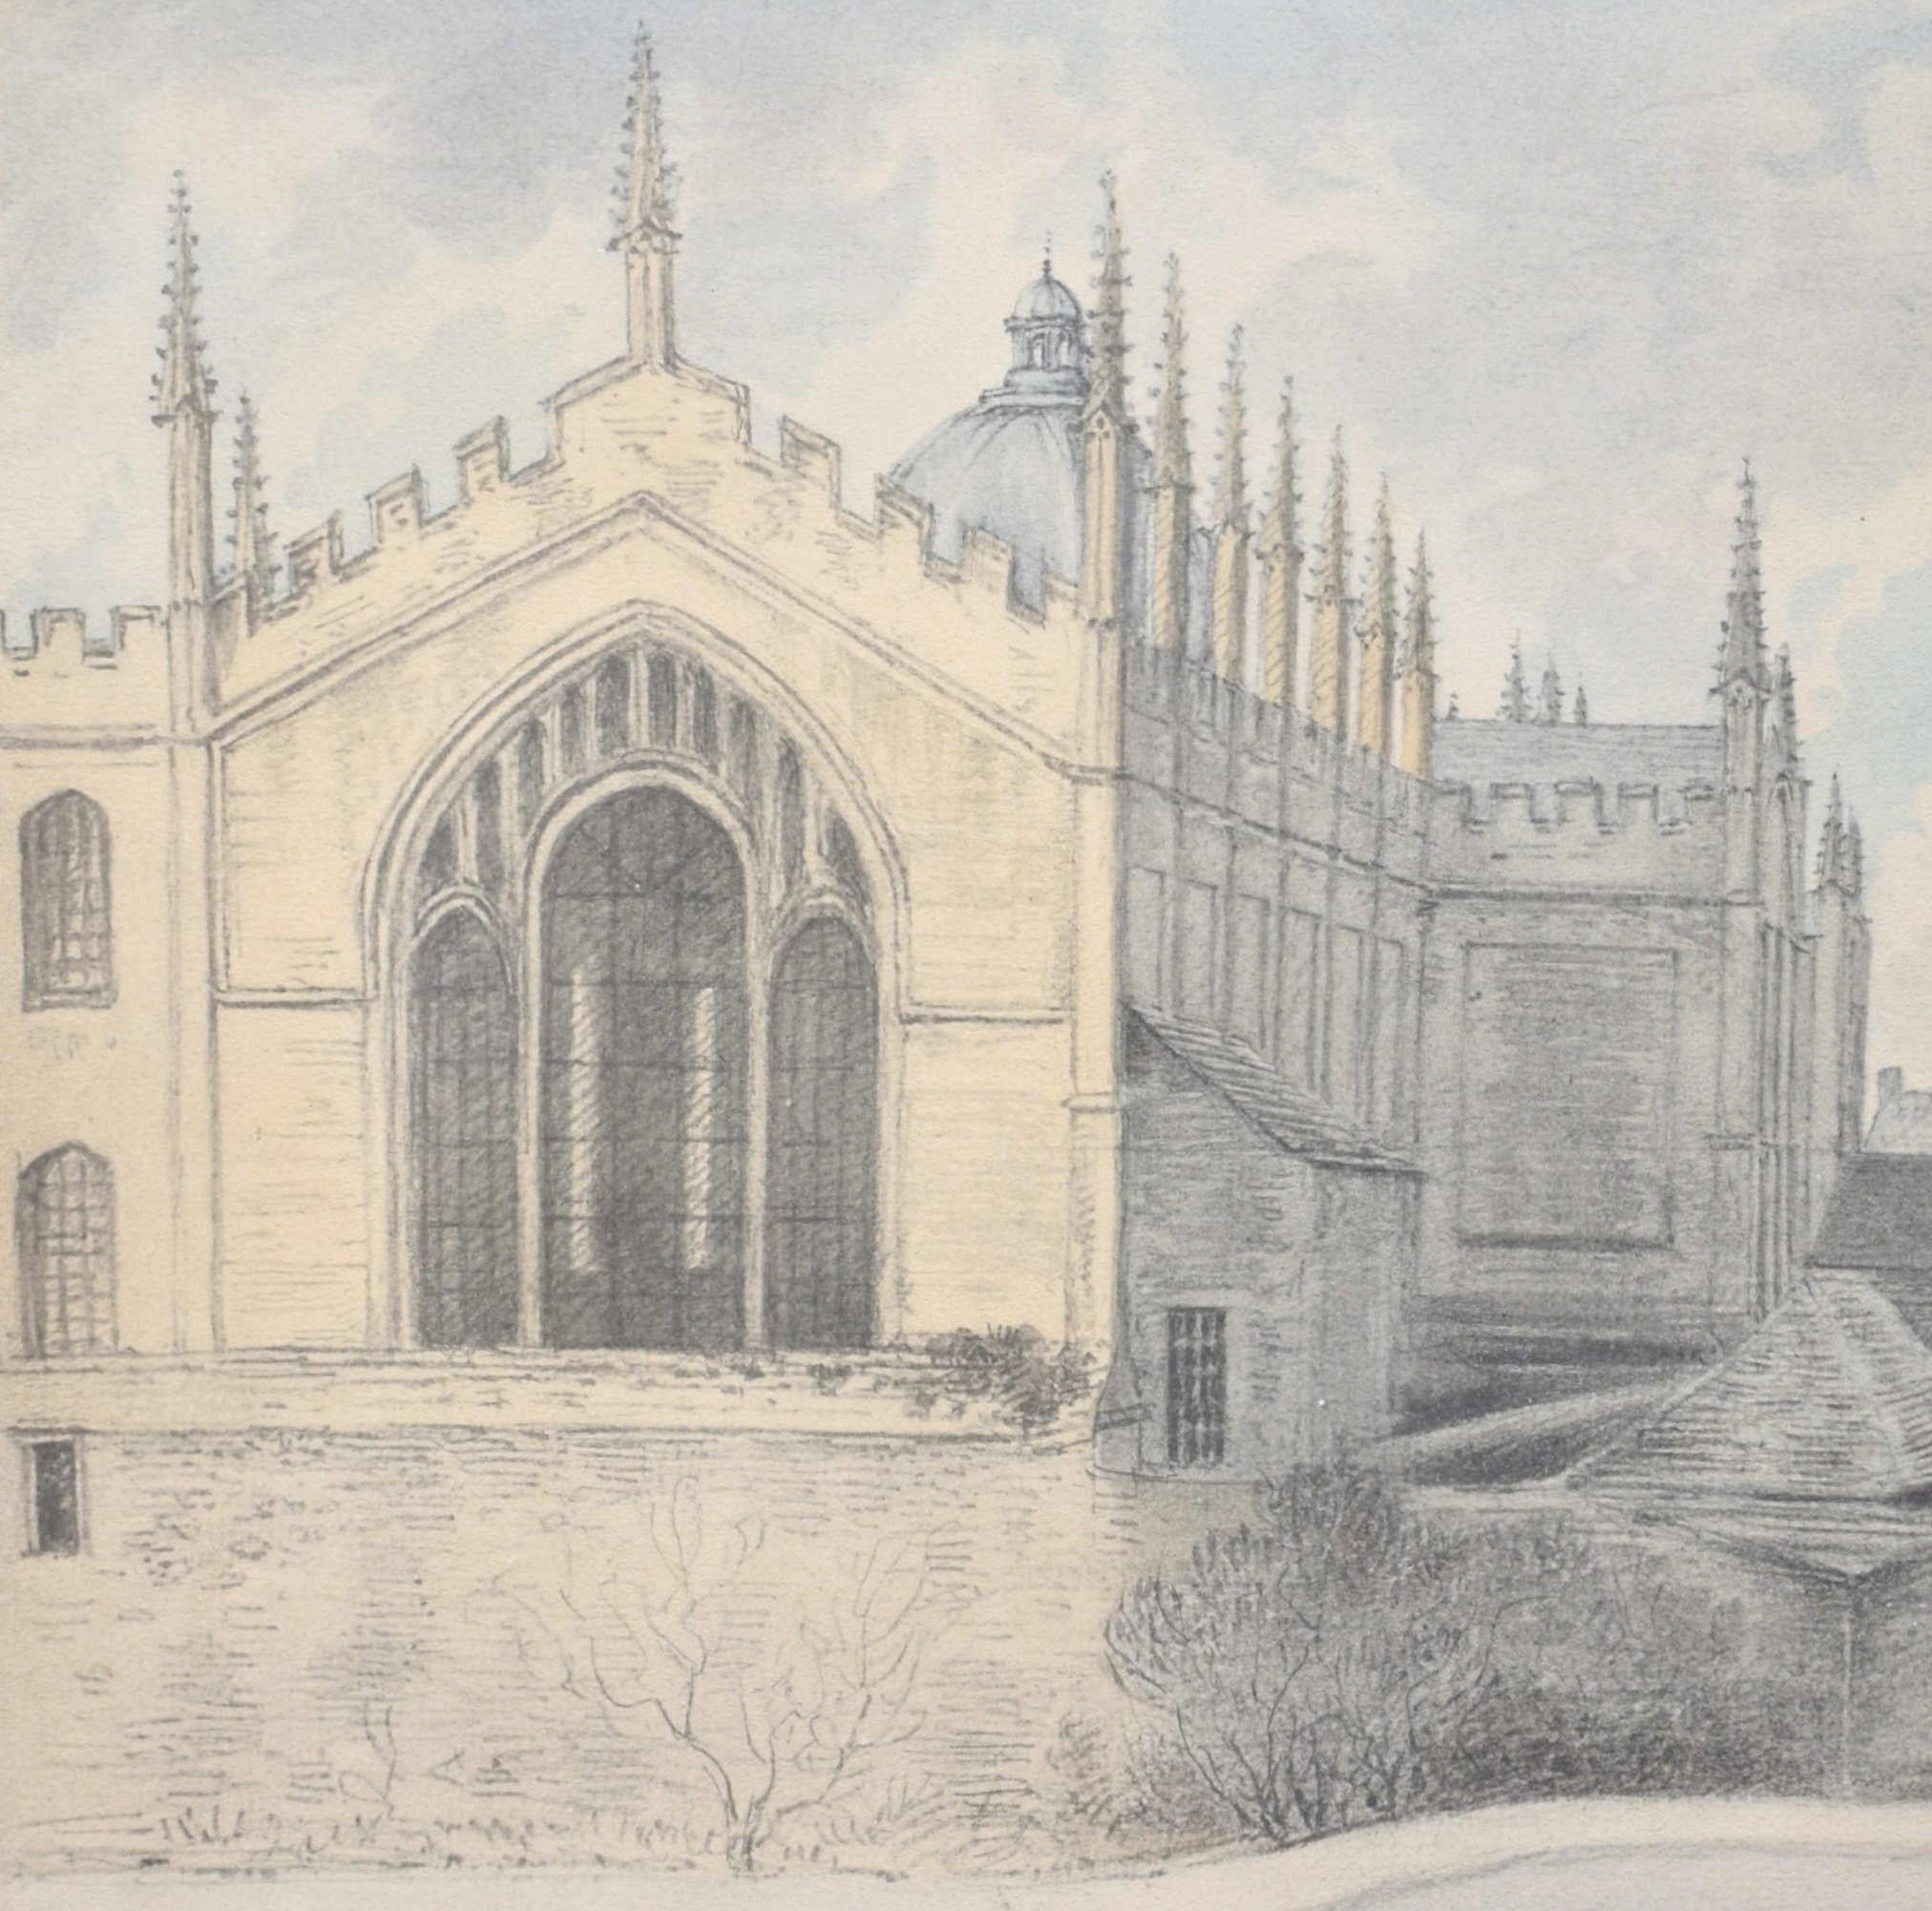 New College, View from the Master's Lodgings lithograph by John Malchair - Print by John Baptist Malchair